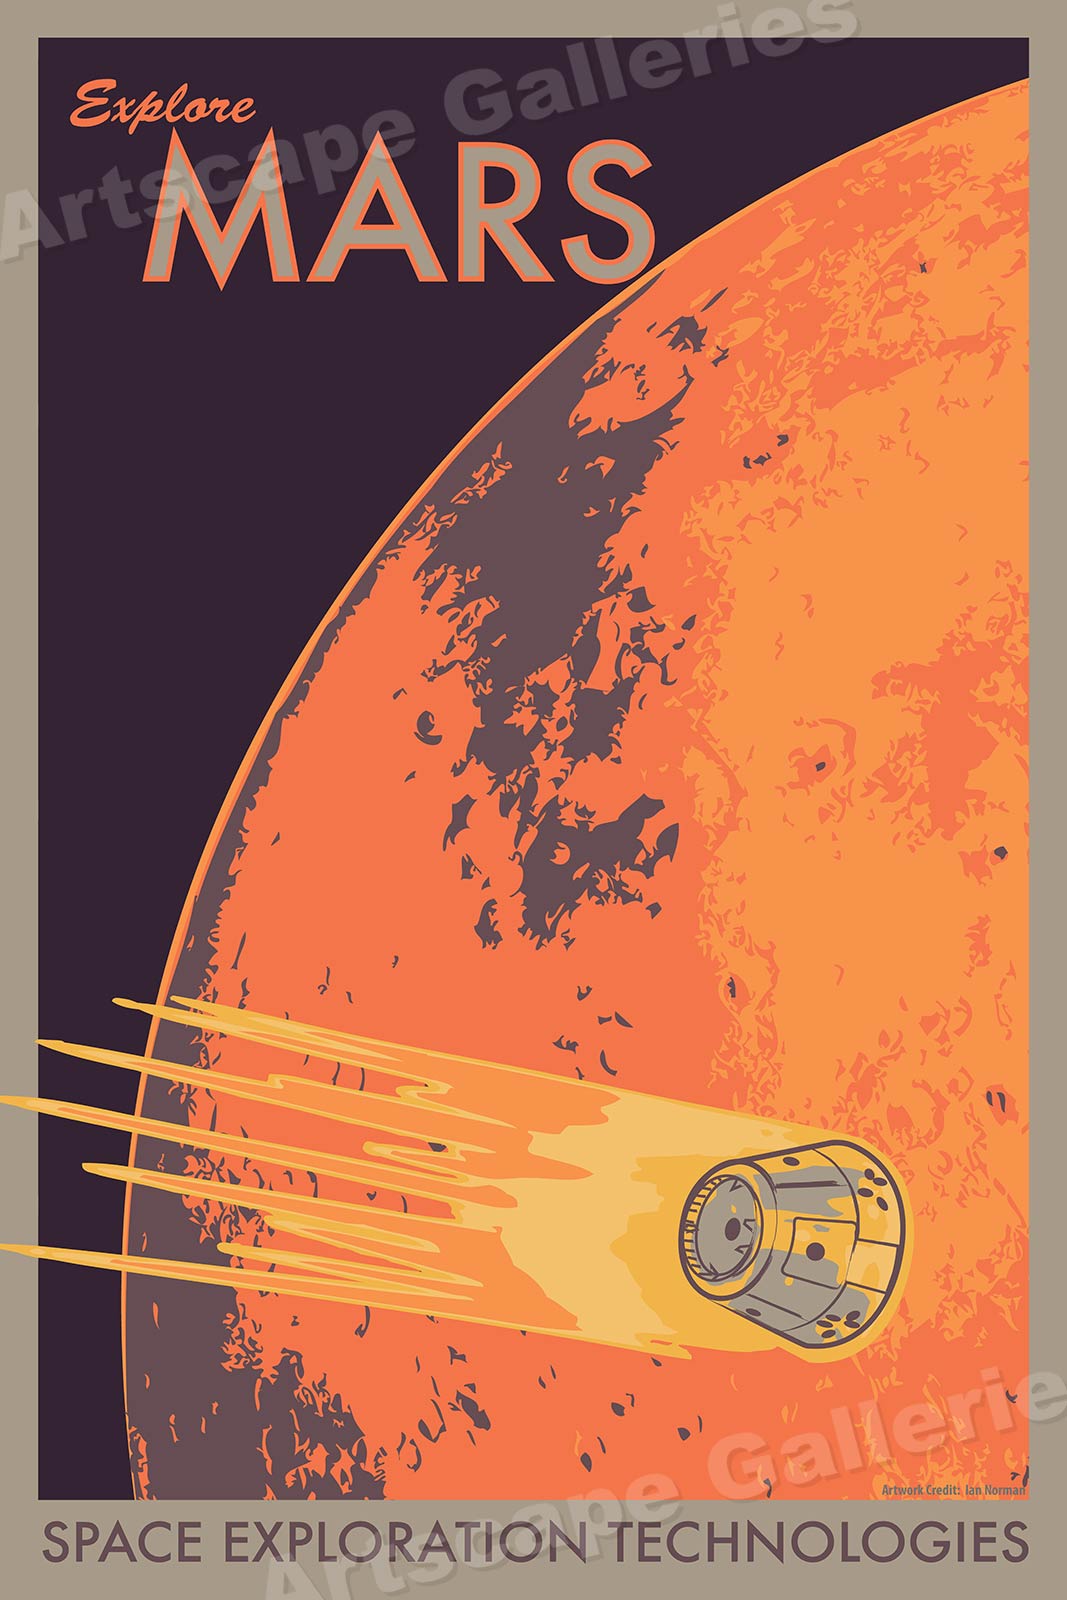 mars travel posters